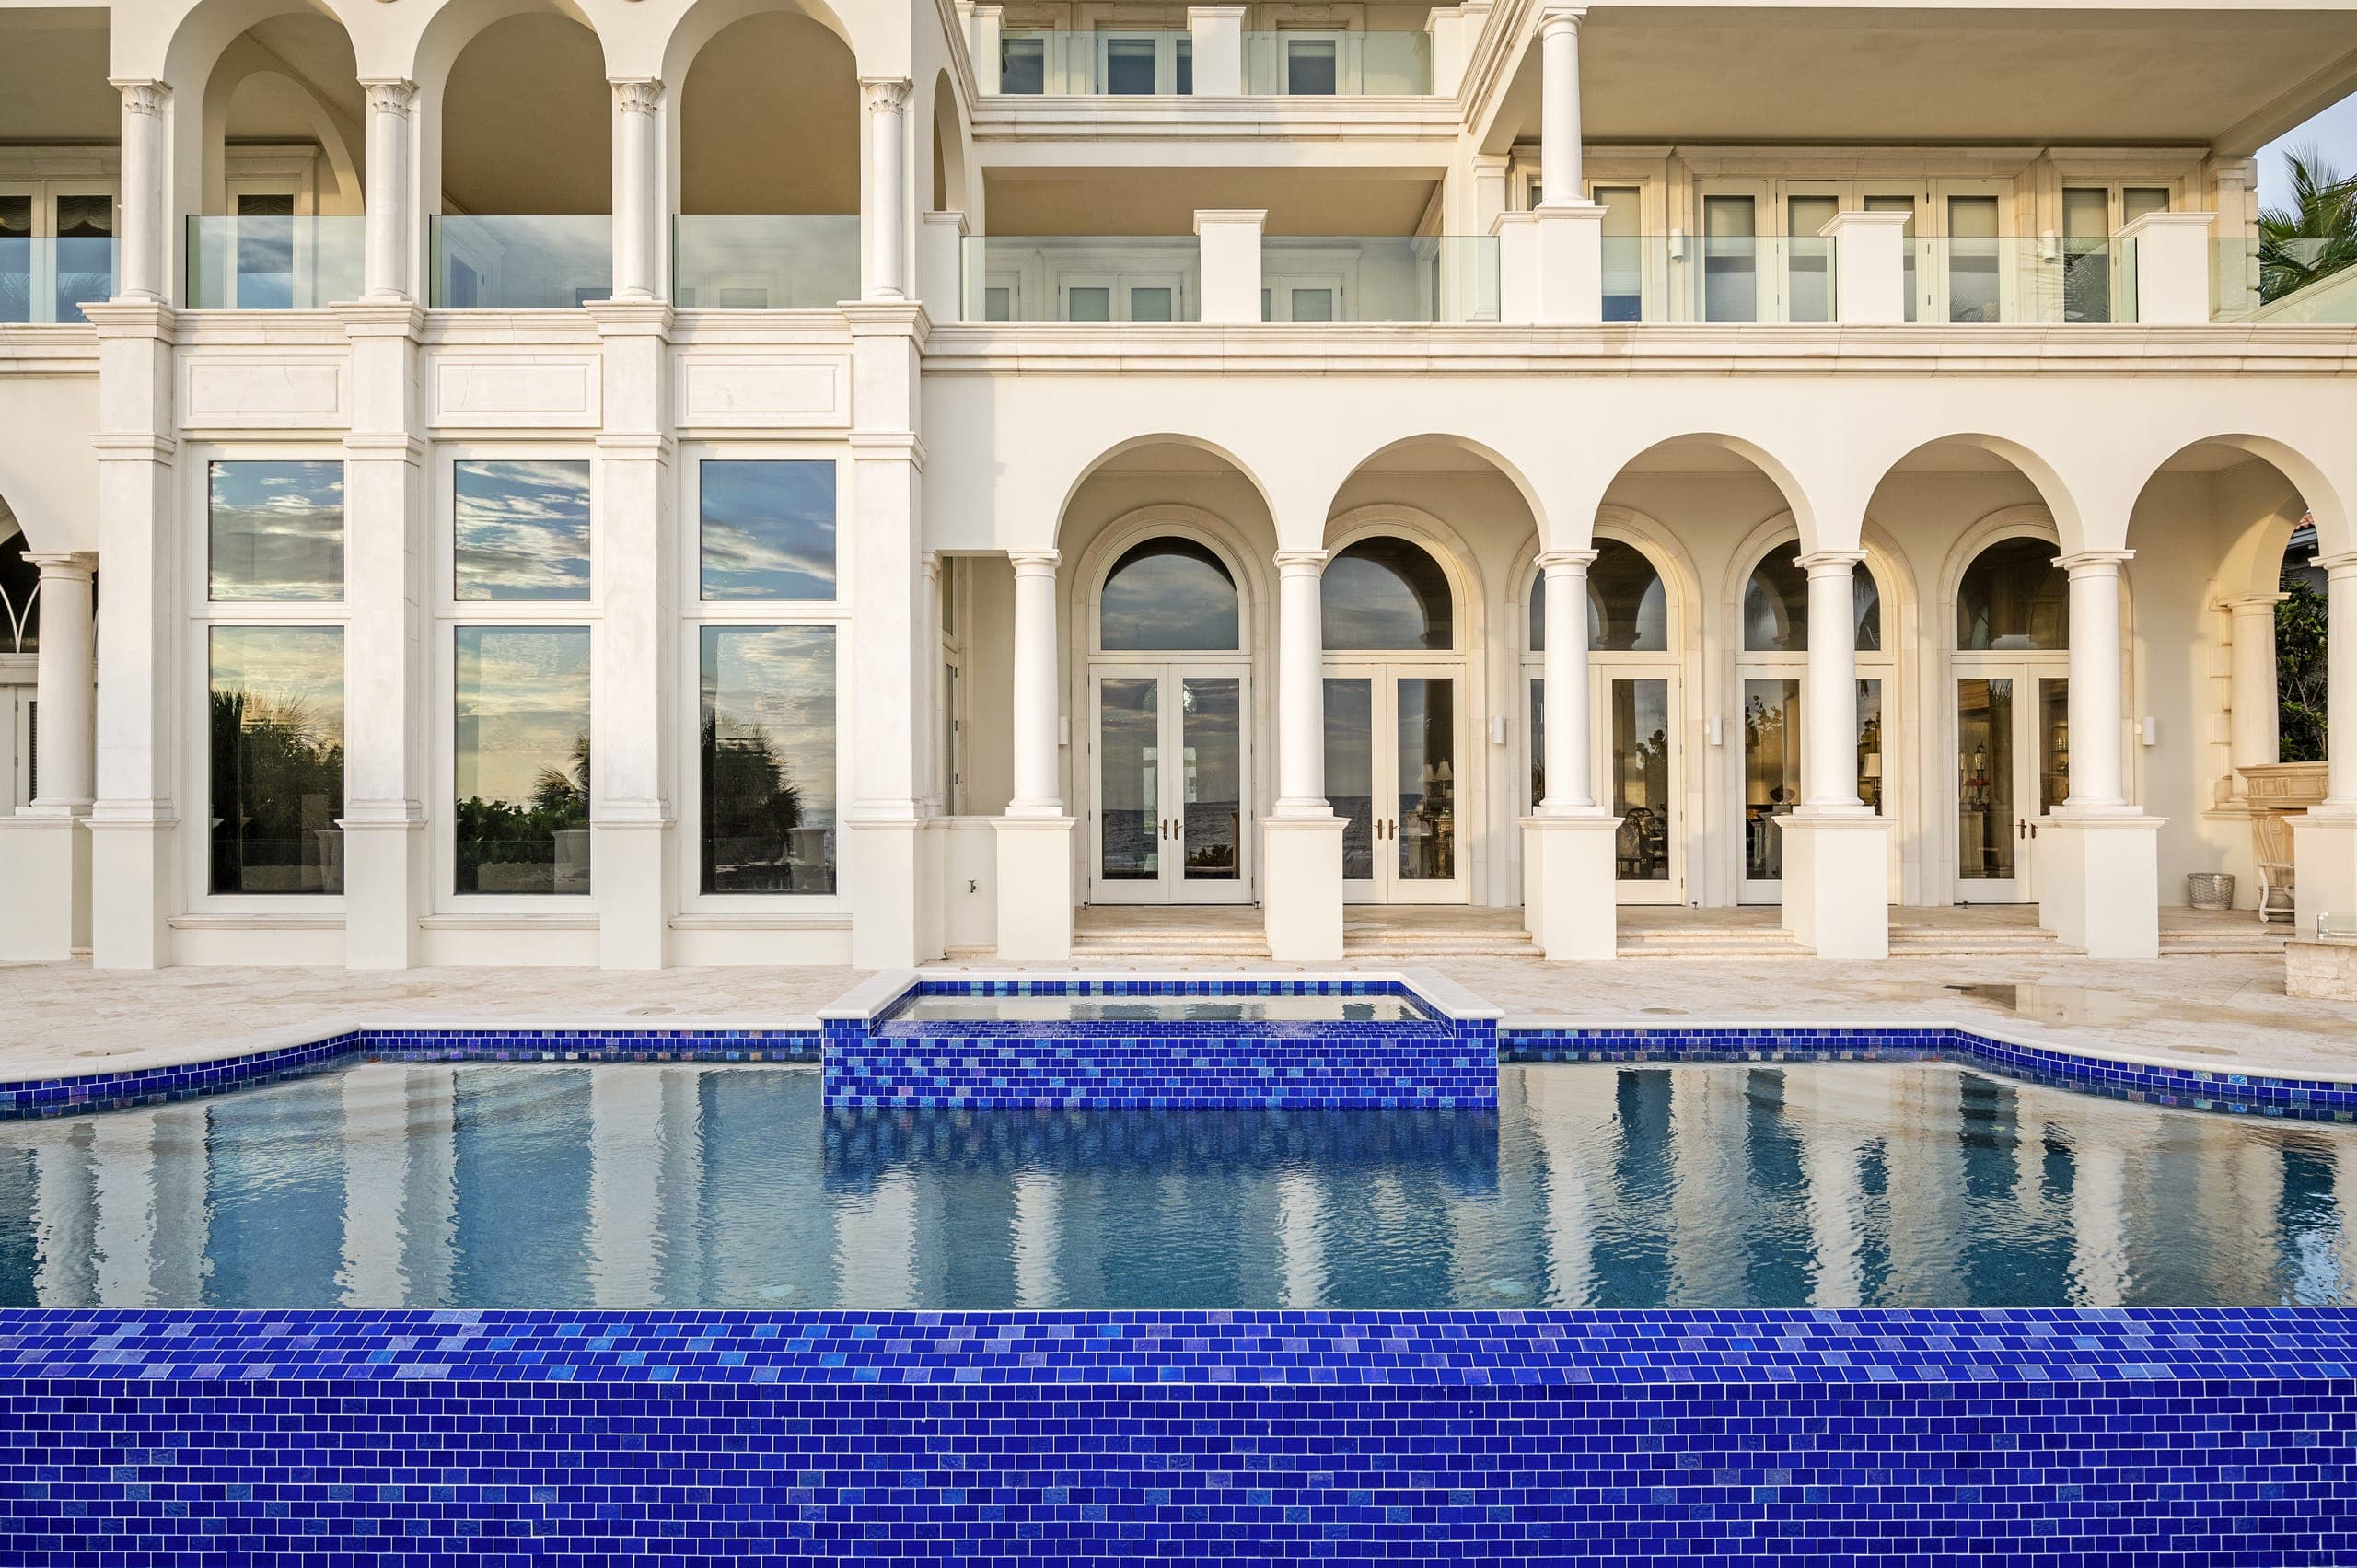 Venetian Architecture Arches And Columns Infinity Pool Iridecent Tile